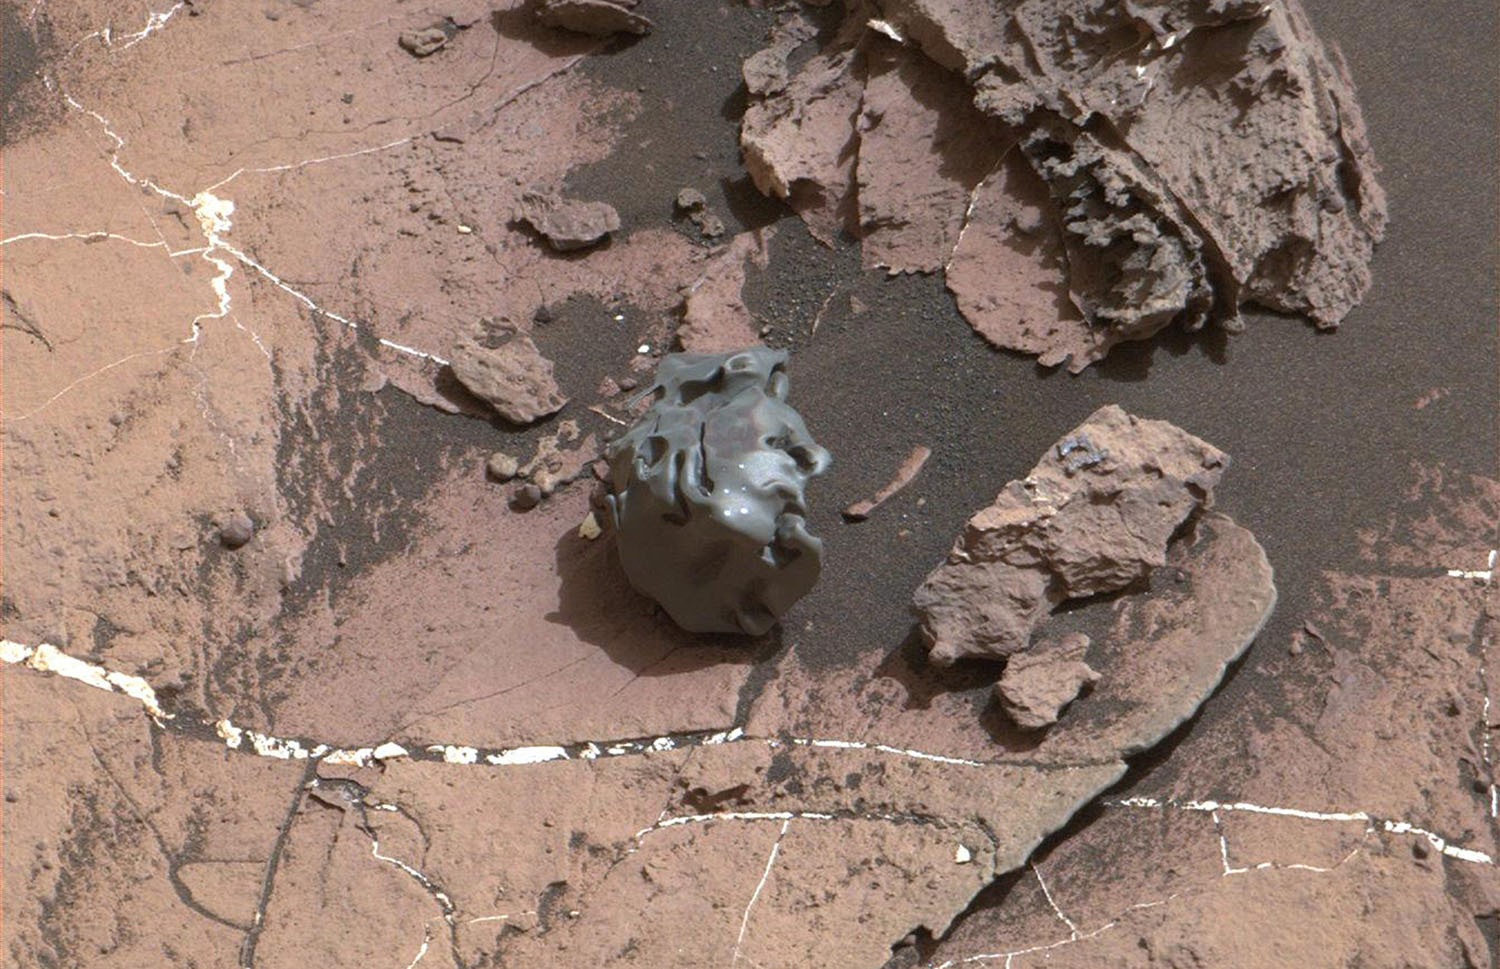 The dark, smooth-surfaced object at the center of this Oct. 30, 2016, image from the Mast Camera (Mastcam) on NASA's Curiosity Mars rover was examined with laser pulses and confirmed to be an iron-nickel meteorite.

The grid of shiny points visible on the object resulted from that laser zapping by Curiosity's Chemistry and Camera (ChemCam) instrument.

The meteorite is about the size of a golf ball. It is informally named "Egg Rock," for a site in Maine. Locations around Bar Harbor, Maine, are the naming theme for an area on Mars' Mount Sharp that Curiosity reached in October.

Iron-nickel meteorites are a common class of space rocks found on Earth, and previous examples have been found on Mars, but Egg Rock is the first on Mars to be examined with a laser-firing spectrometer.

The scene is presented with a color adjustment that approximates white balancing, to resemble how the rocks and sand would appear under daytime lighting conditions on Earth. Figure 1 includes a scale bar of 5 centimeters (about 2 inches). (NASA/JPL-Caltech/MSSS)